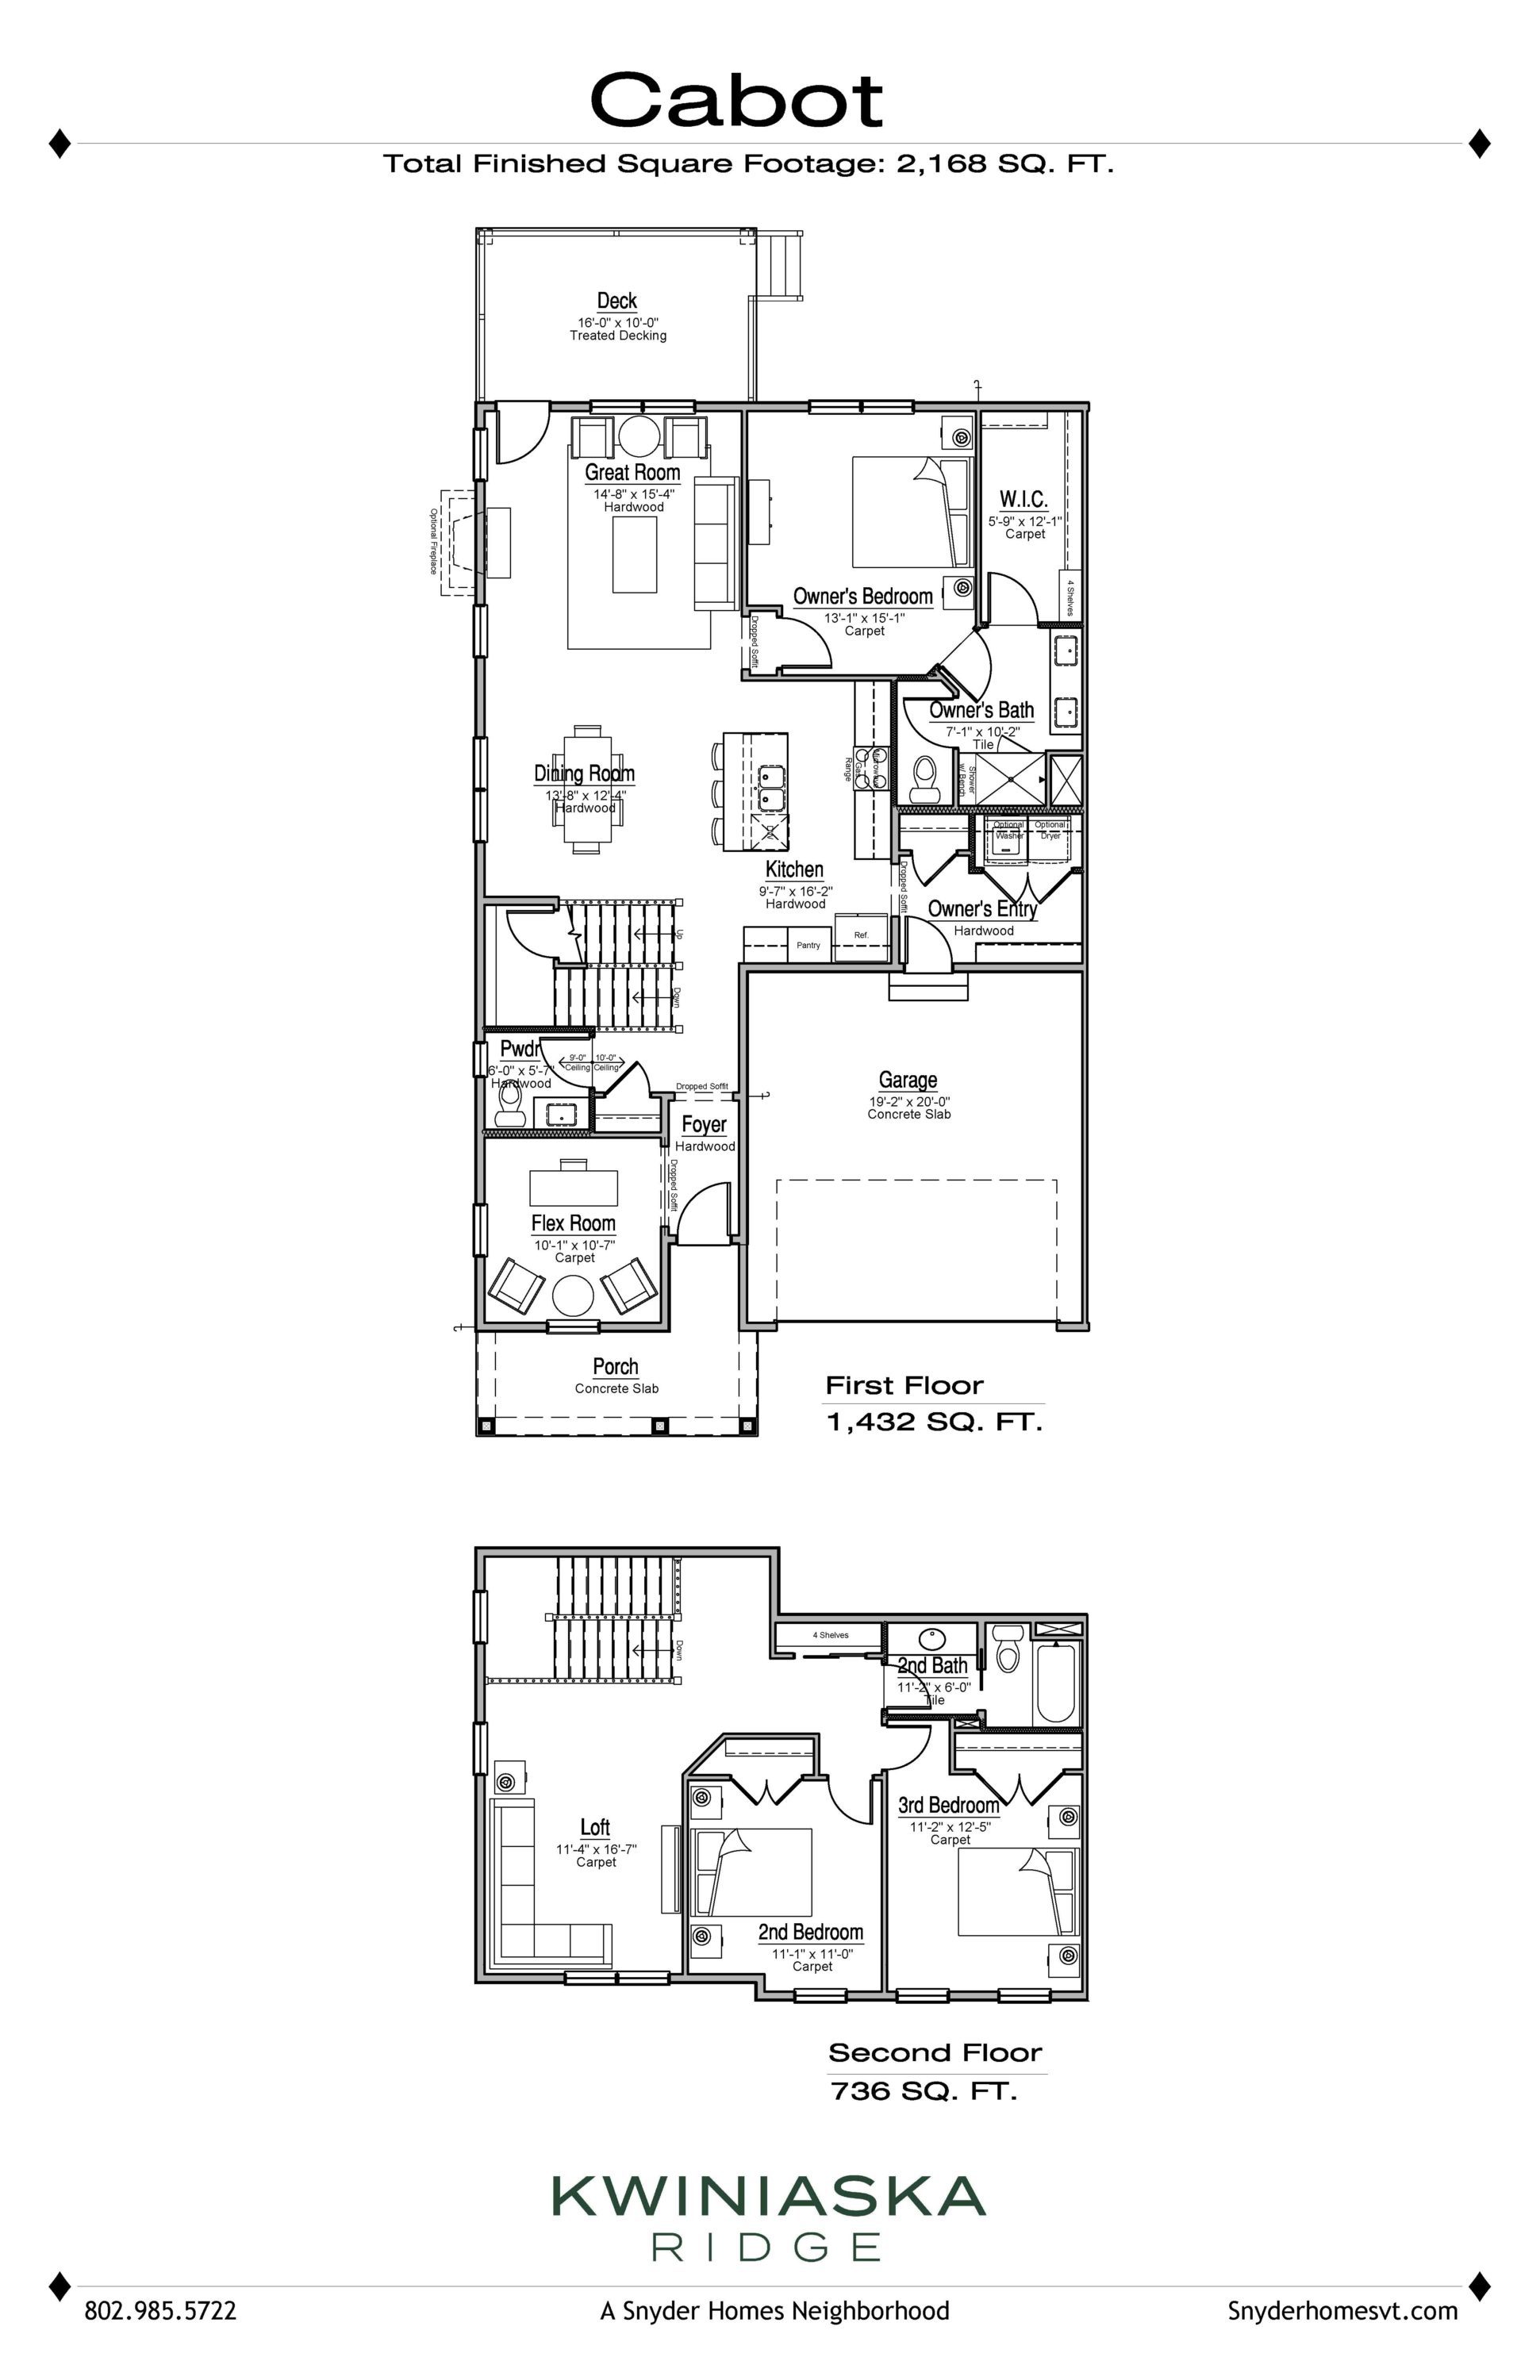 Architectural floor plan of the "cabot" model home showing three levels with detailed room layouts and total square footage, labeled "kwinaska ridge" by snyder homes.